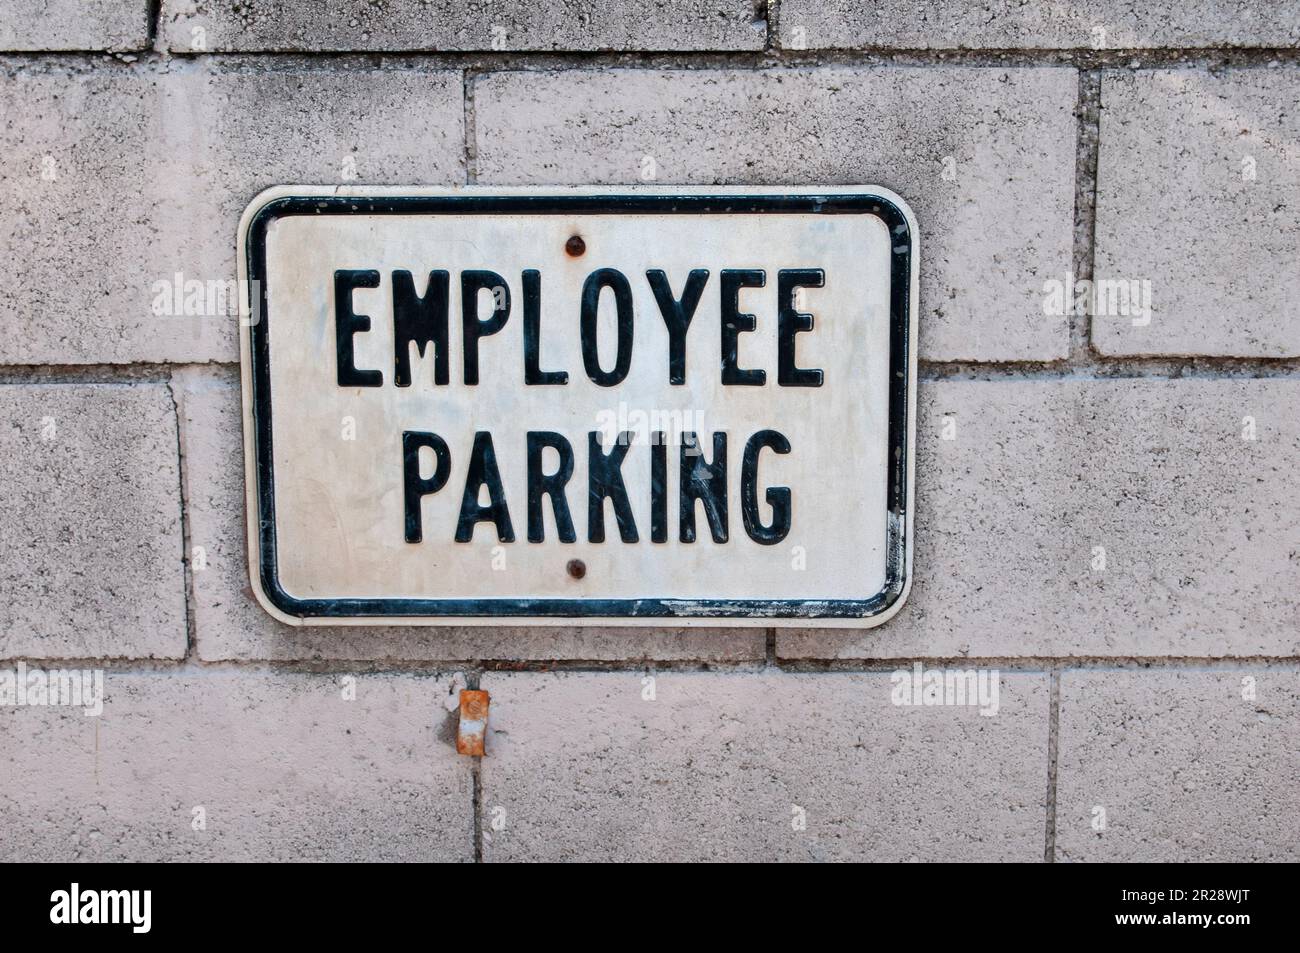 Employee parking sign on the white concrete brick wall Stock Photo